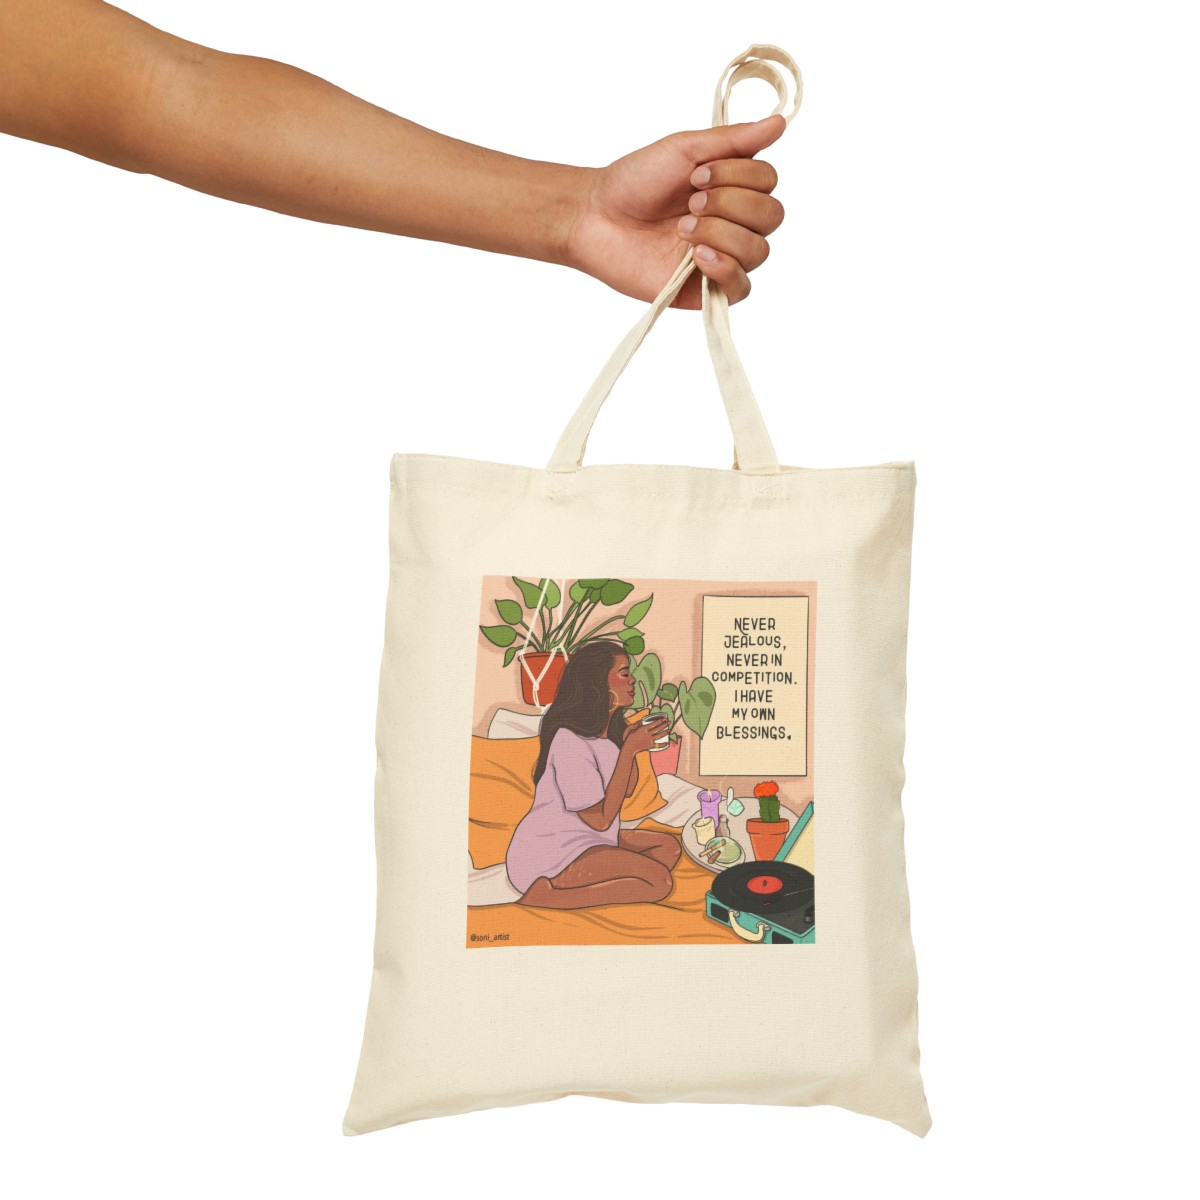 "My own blessings" Cotton Canvas Tote Bag product thumbnail image